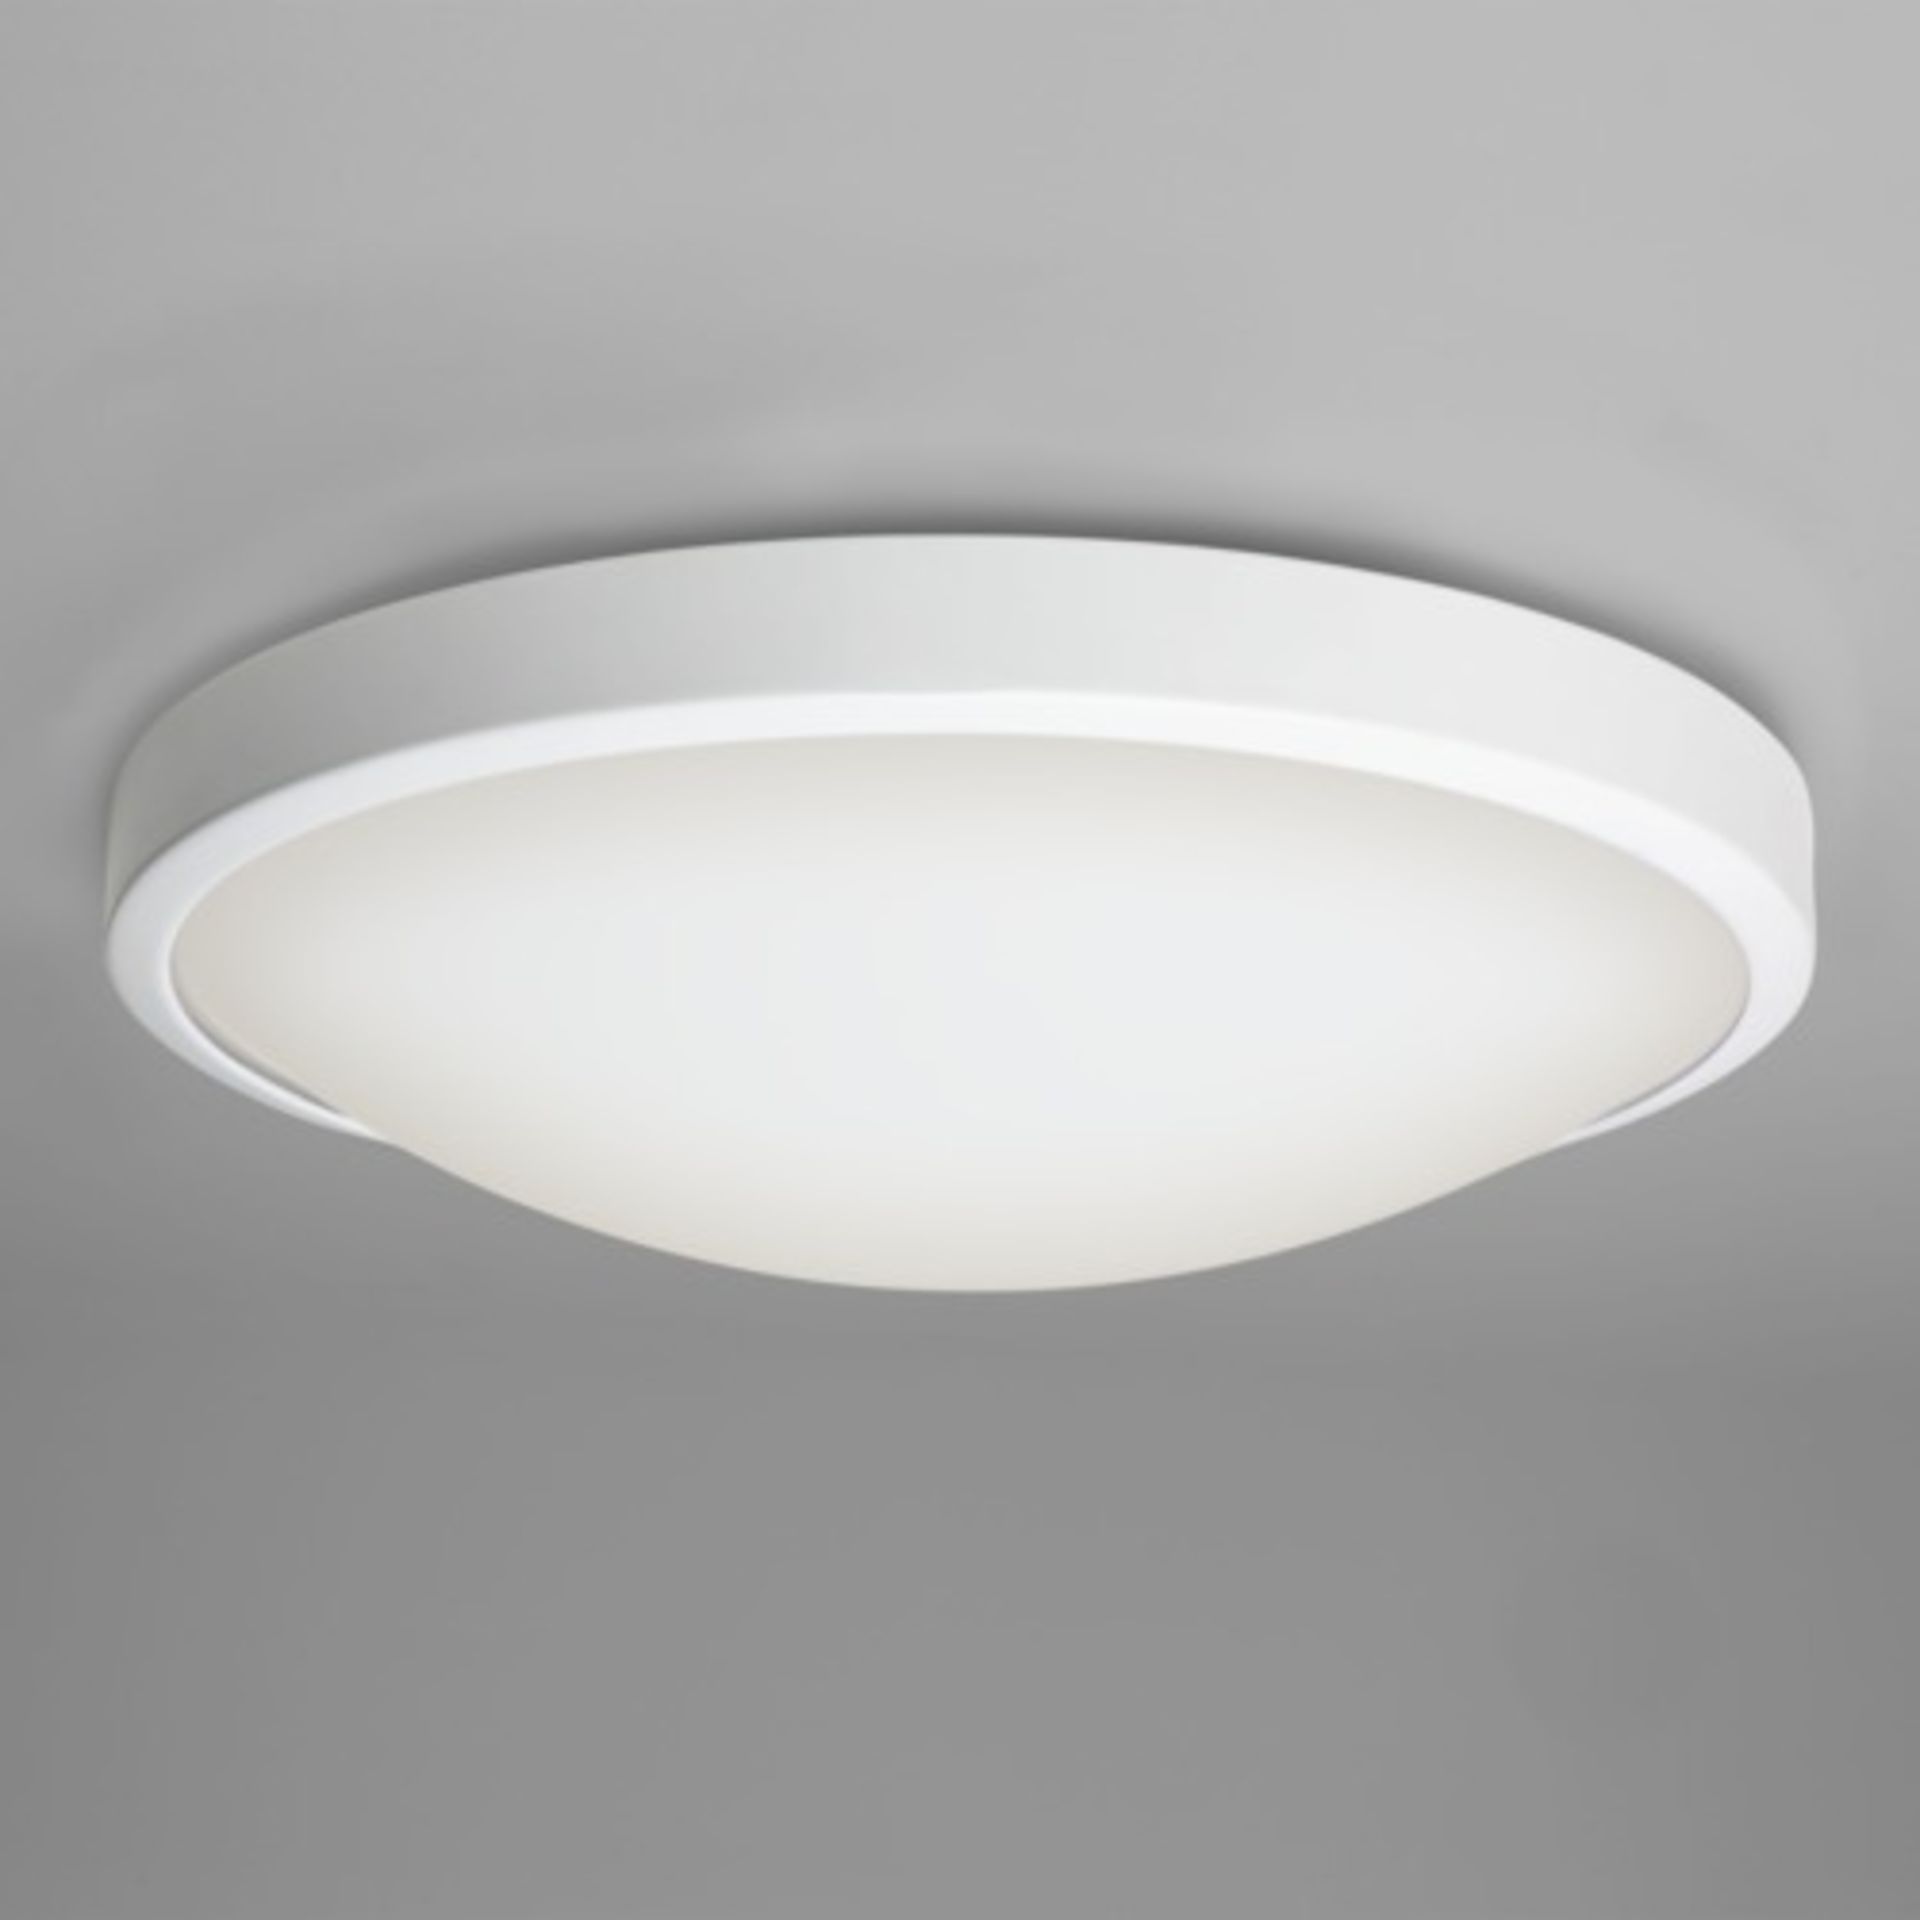 1 x BOXED ASTRO LED CEILING LIGHT RRP £95 (16.10.17) (3794743) *PLEASE NOTE THAT THE BID PRICE IS